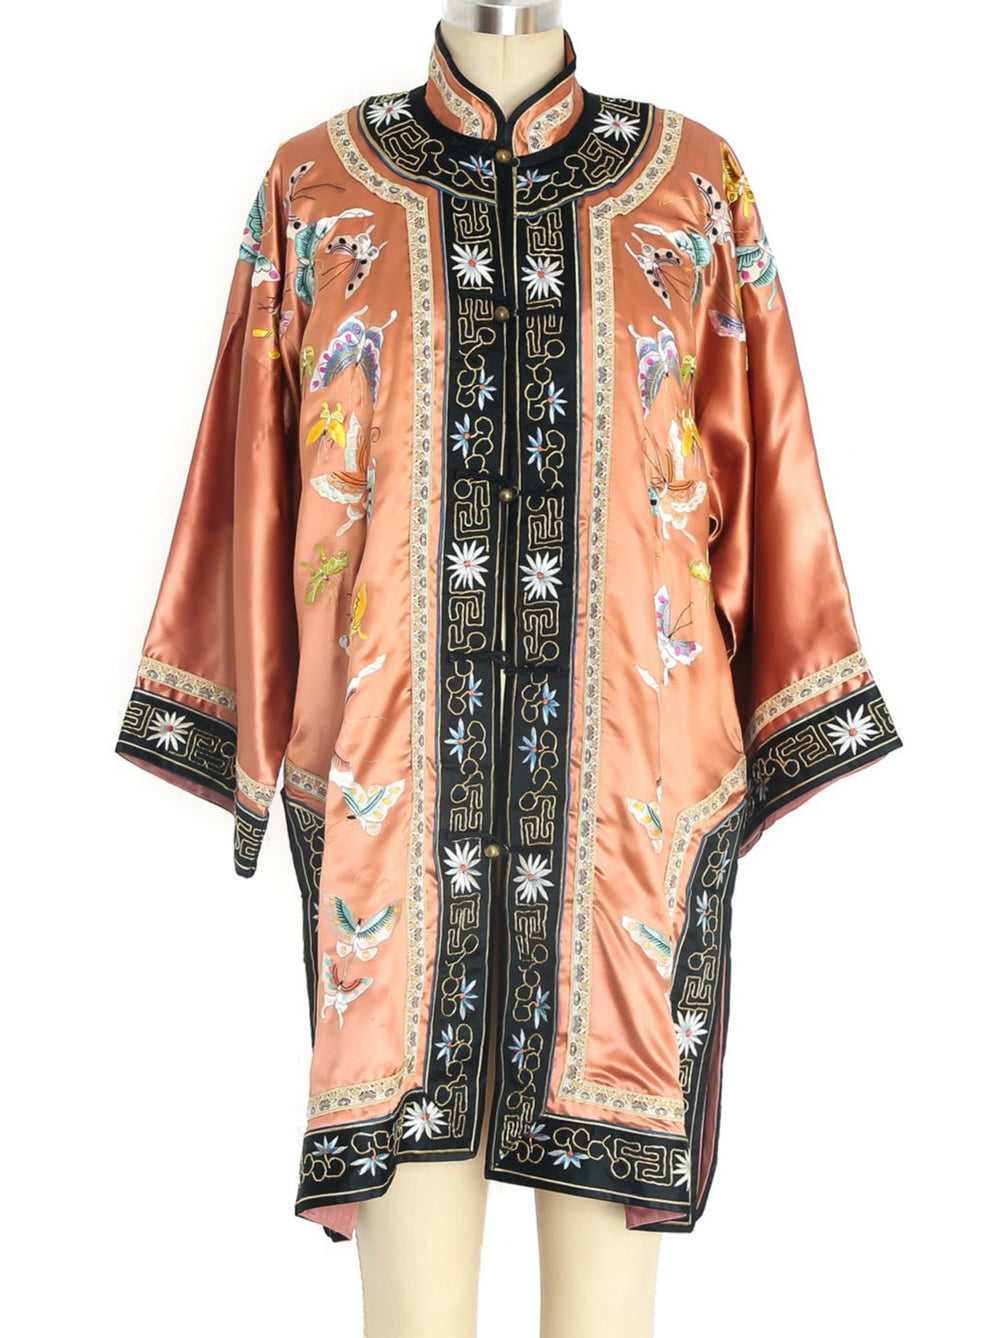 Hand Embroidered Chinese Silk Robe - image 1